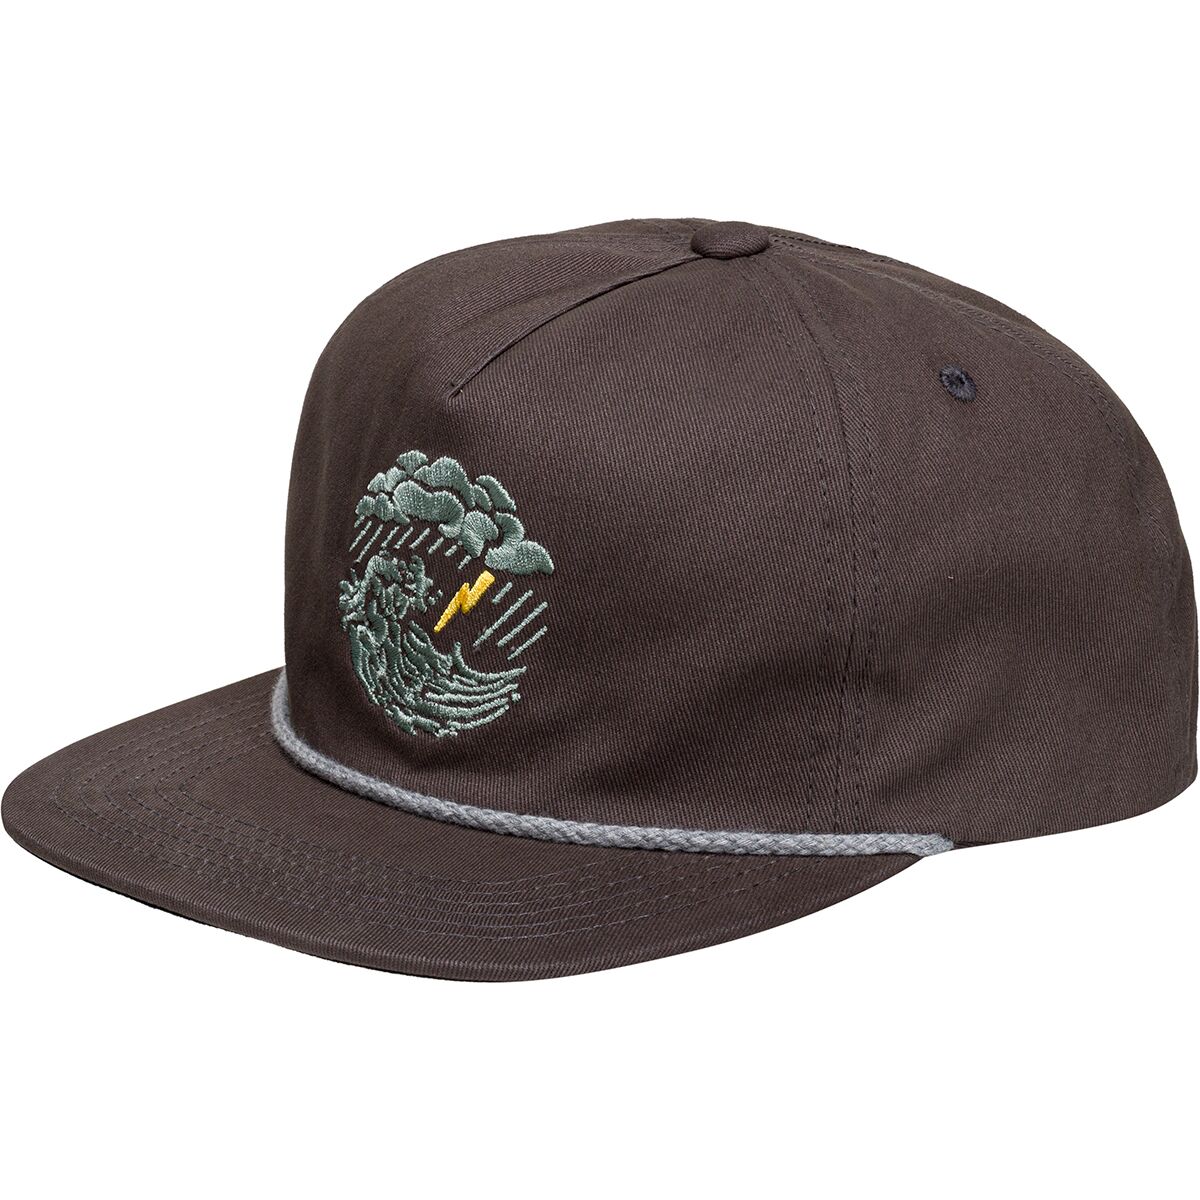 Howler Brothers Turbulent Waters Unstructured Snapback Hat